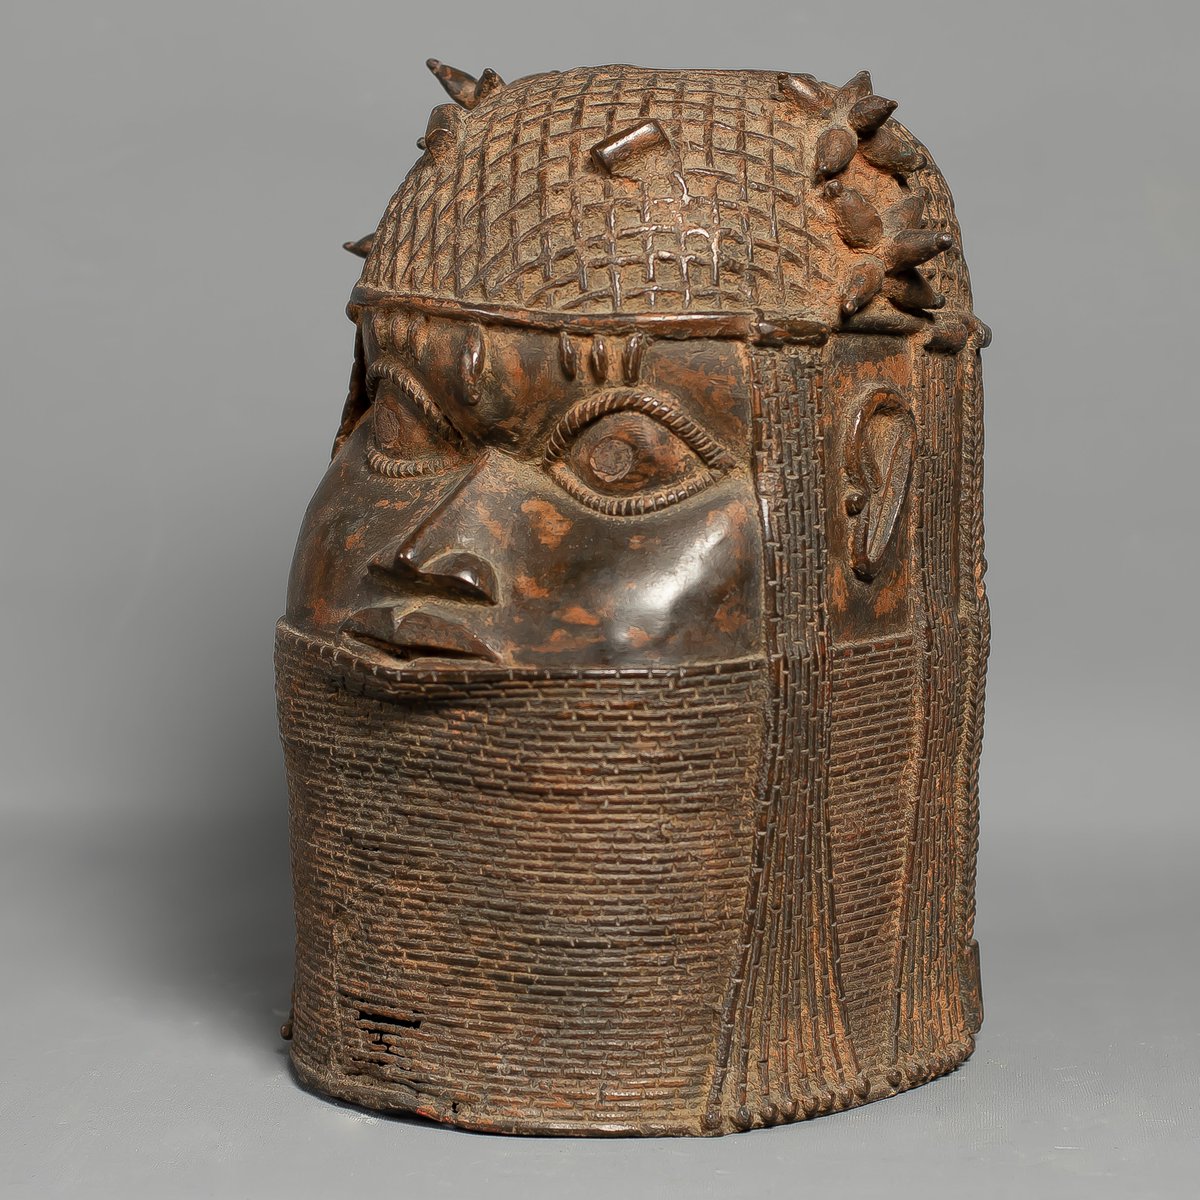 Since the Oba of Benin is trending, we decided to bring you some piece of history from the ancient kingdom of Benin with some interesting facts about the Oba.Commemorative Altar Head, Bronze, 16th Century, 28 x 20 x 16cm.  @shyllonmuseumEnjoy the Thread.